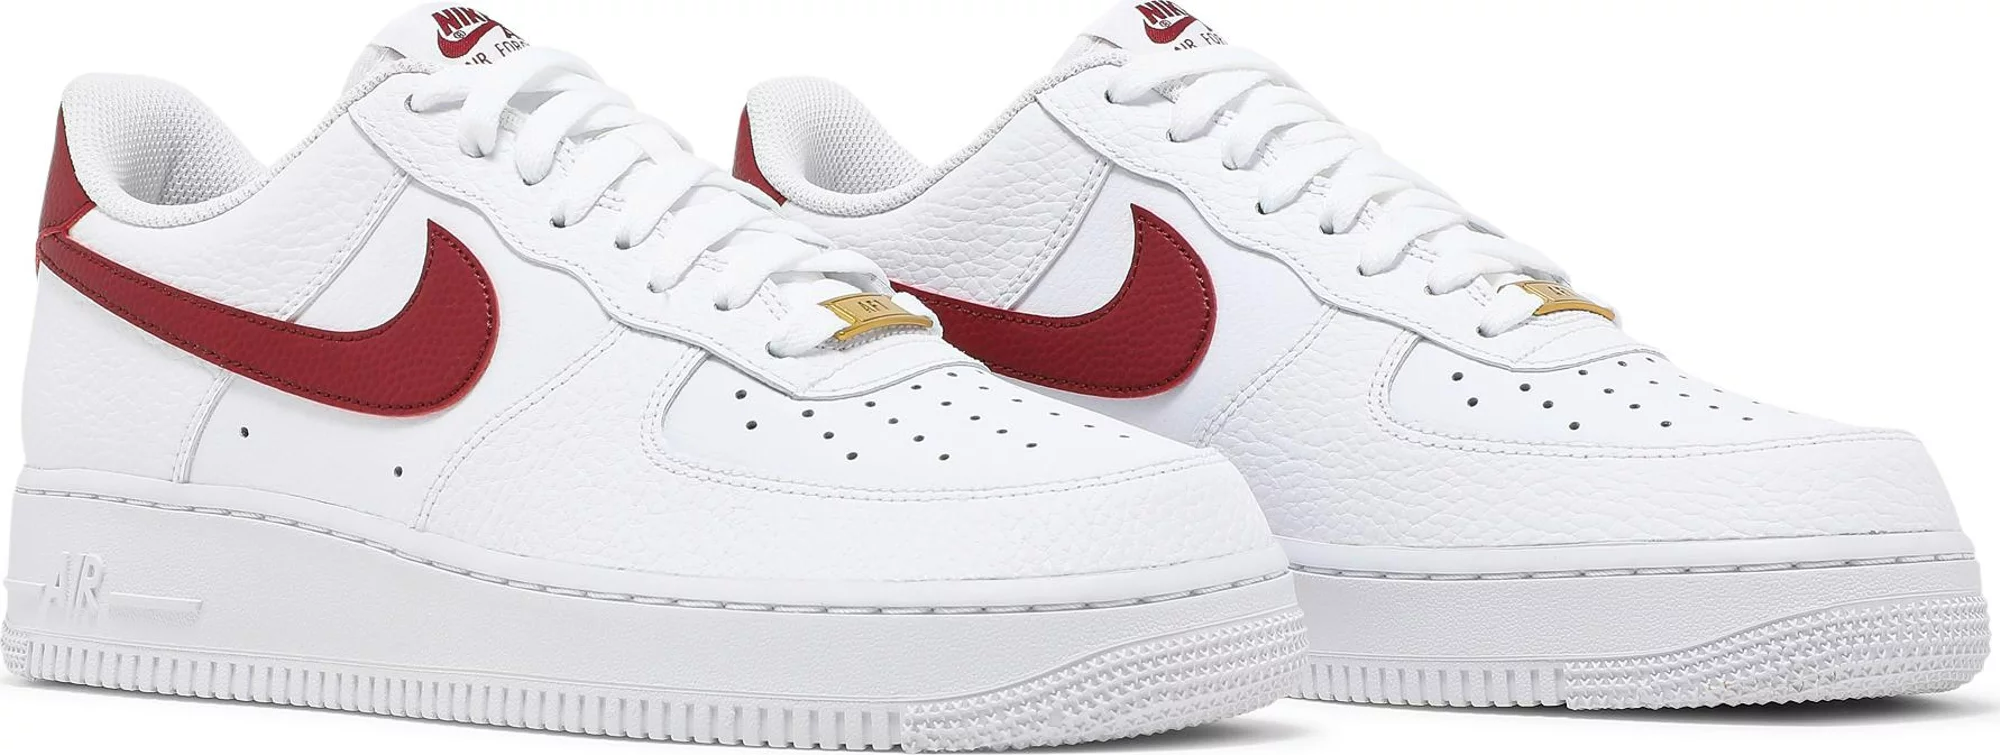 Giày Nike Air Force 1 Low 'White Team Red' Cz0326-100